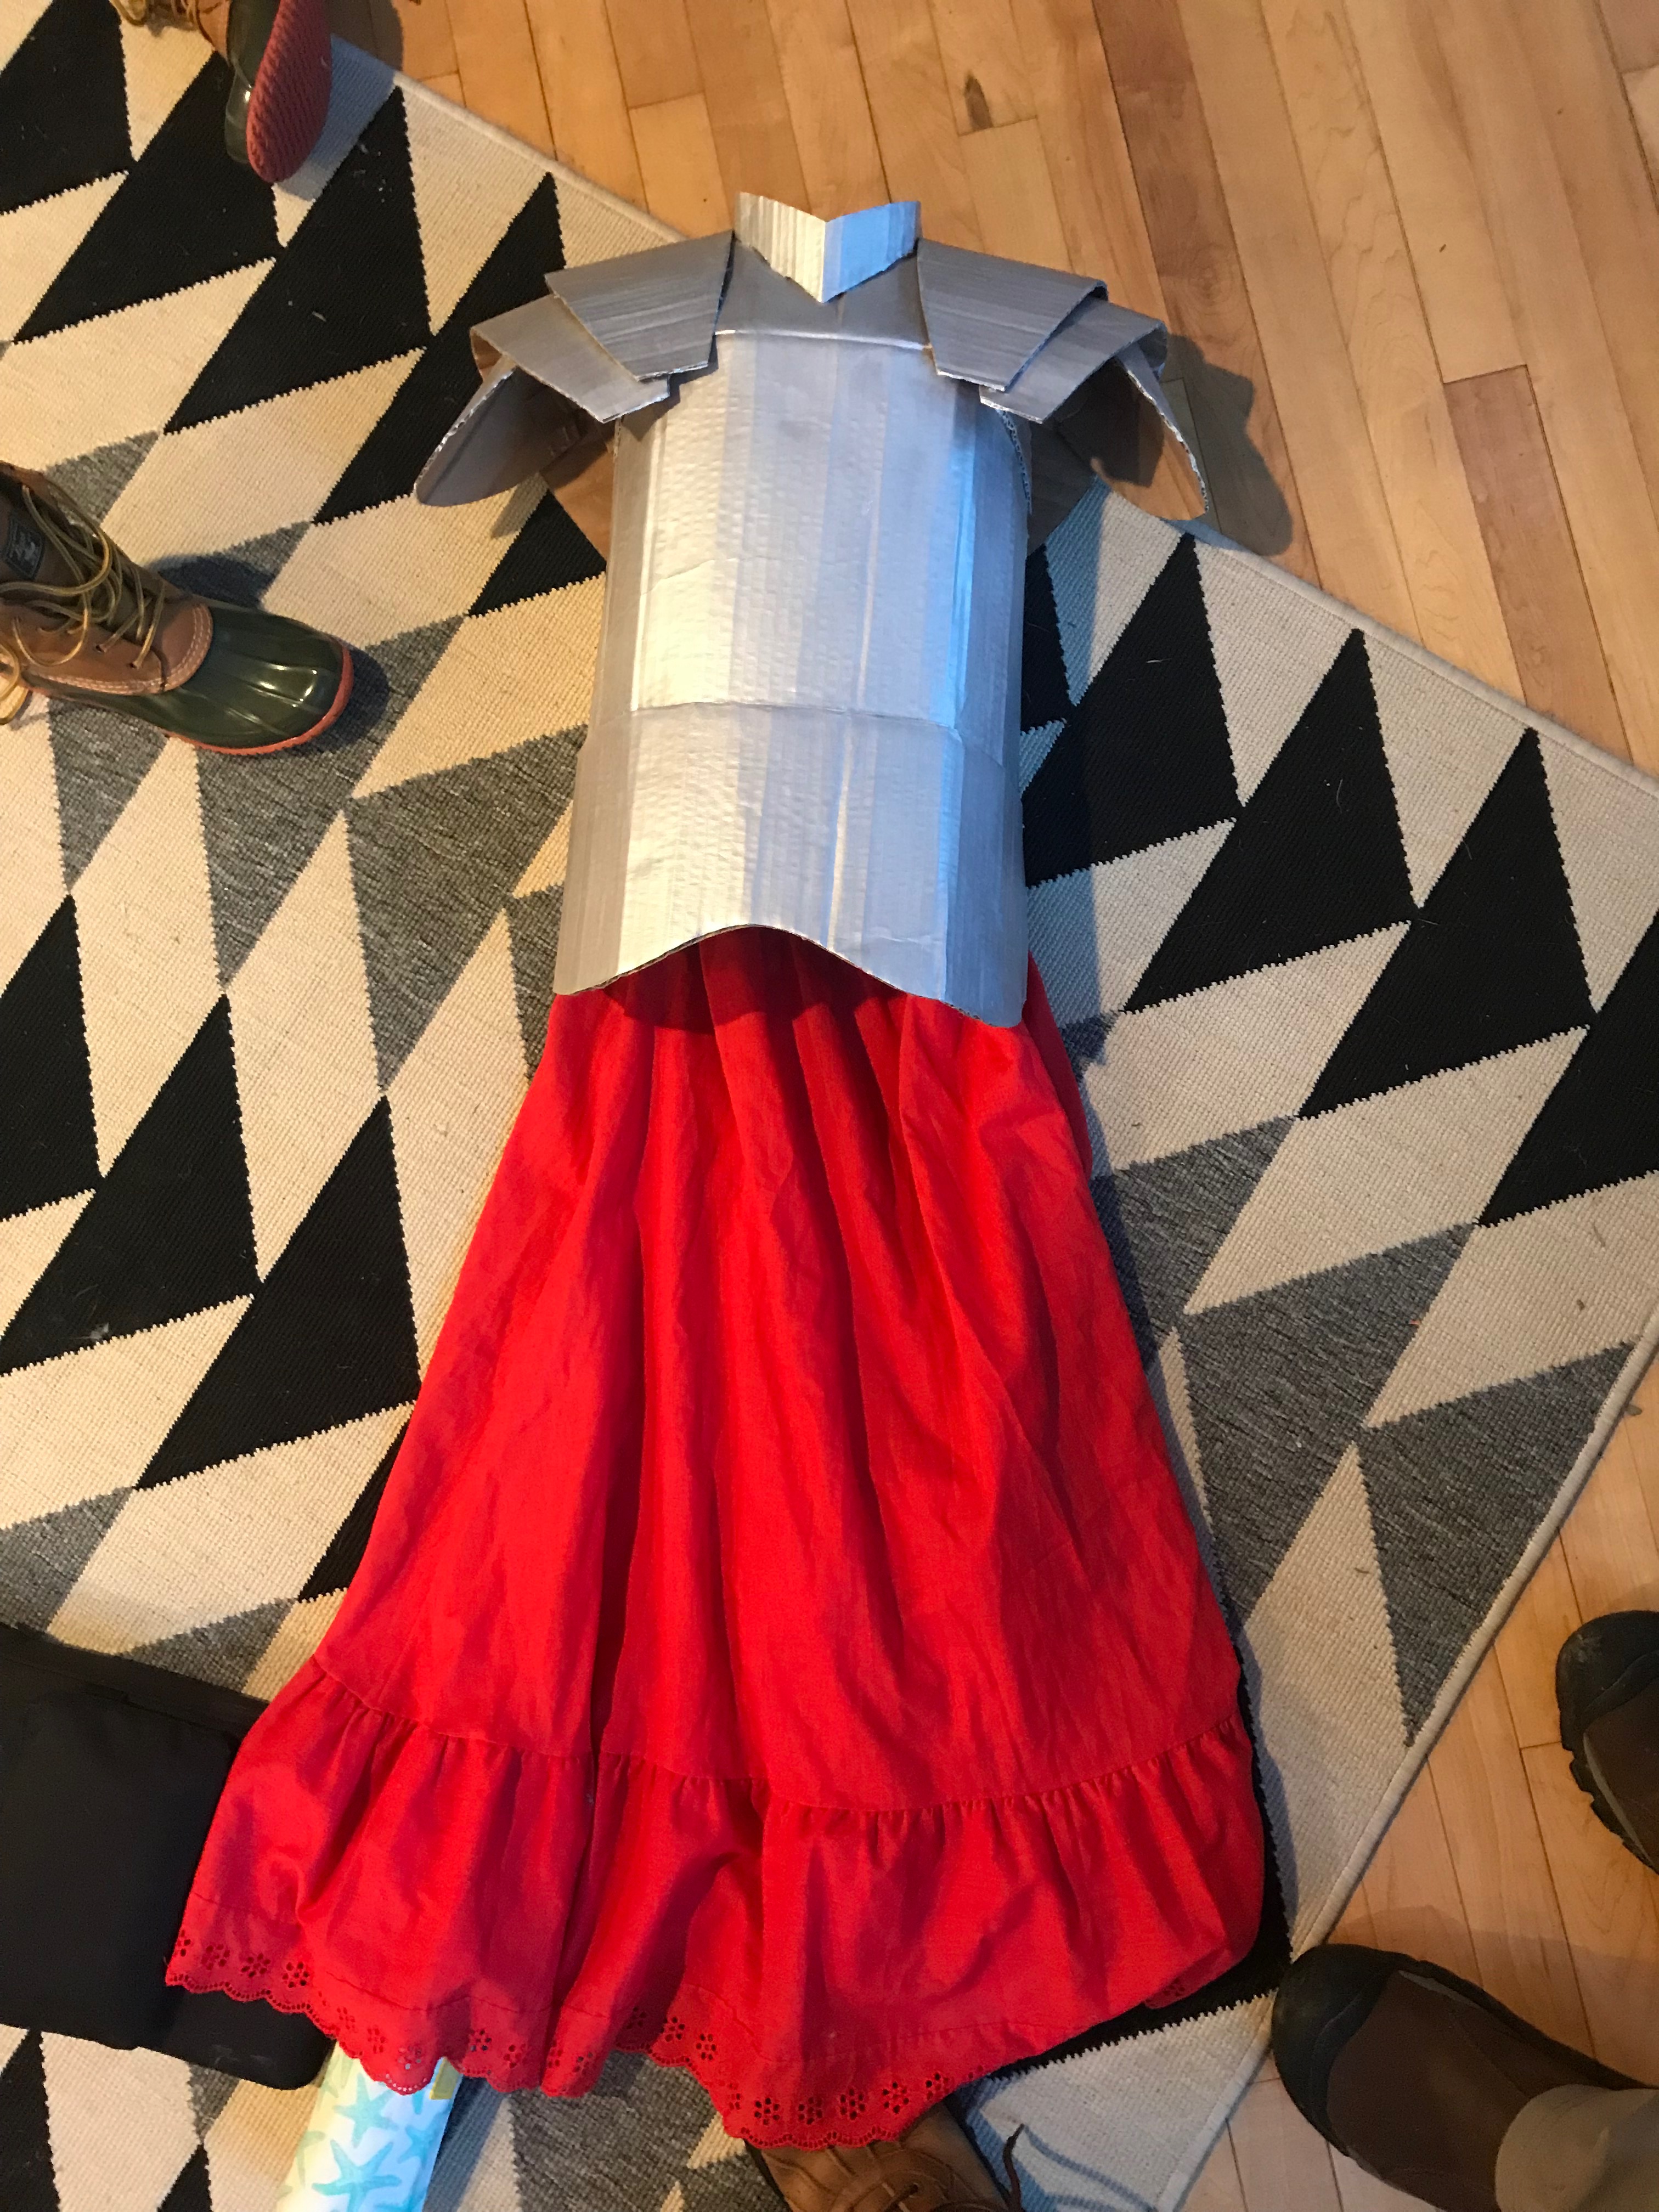 Armor with dress